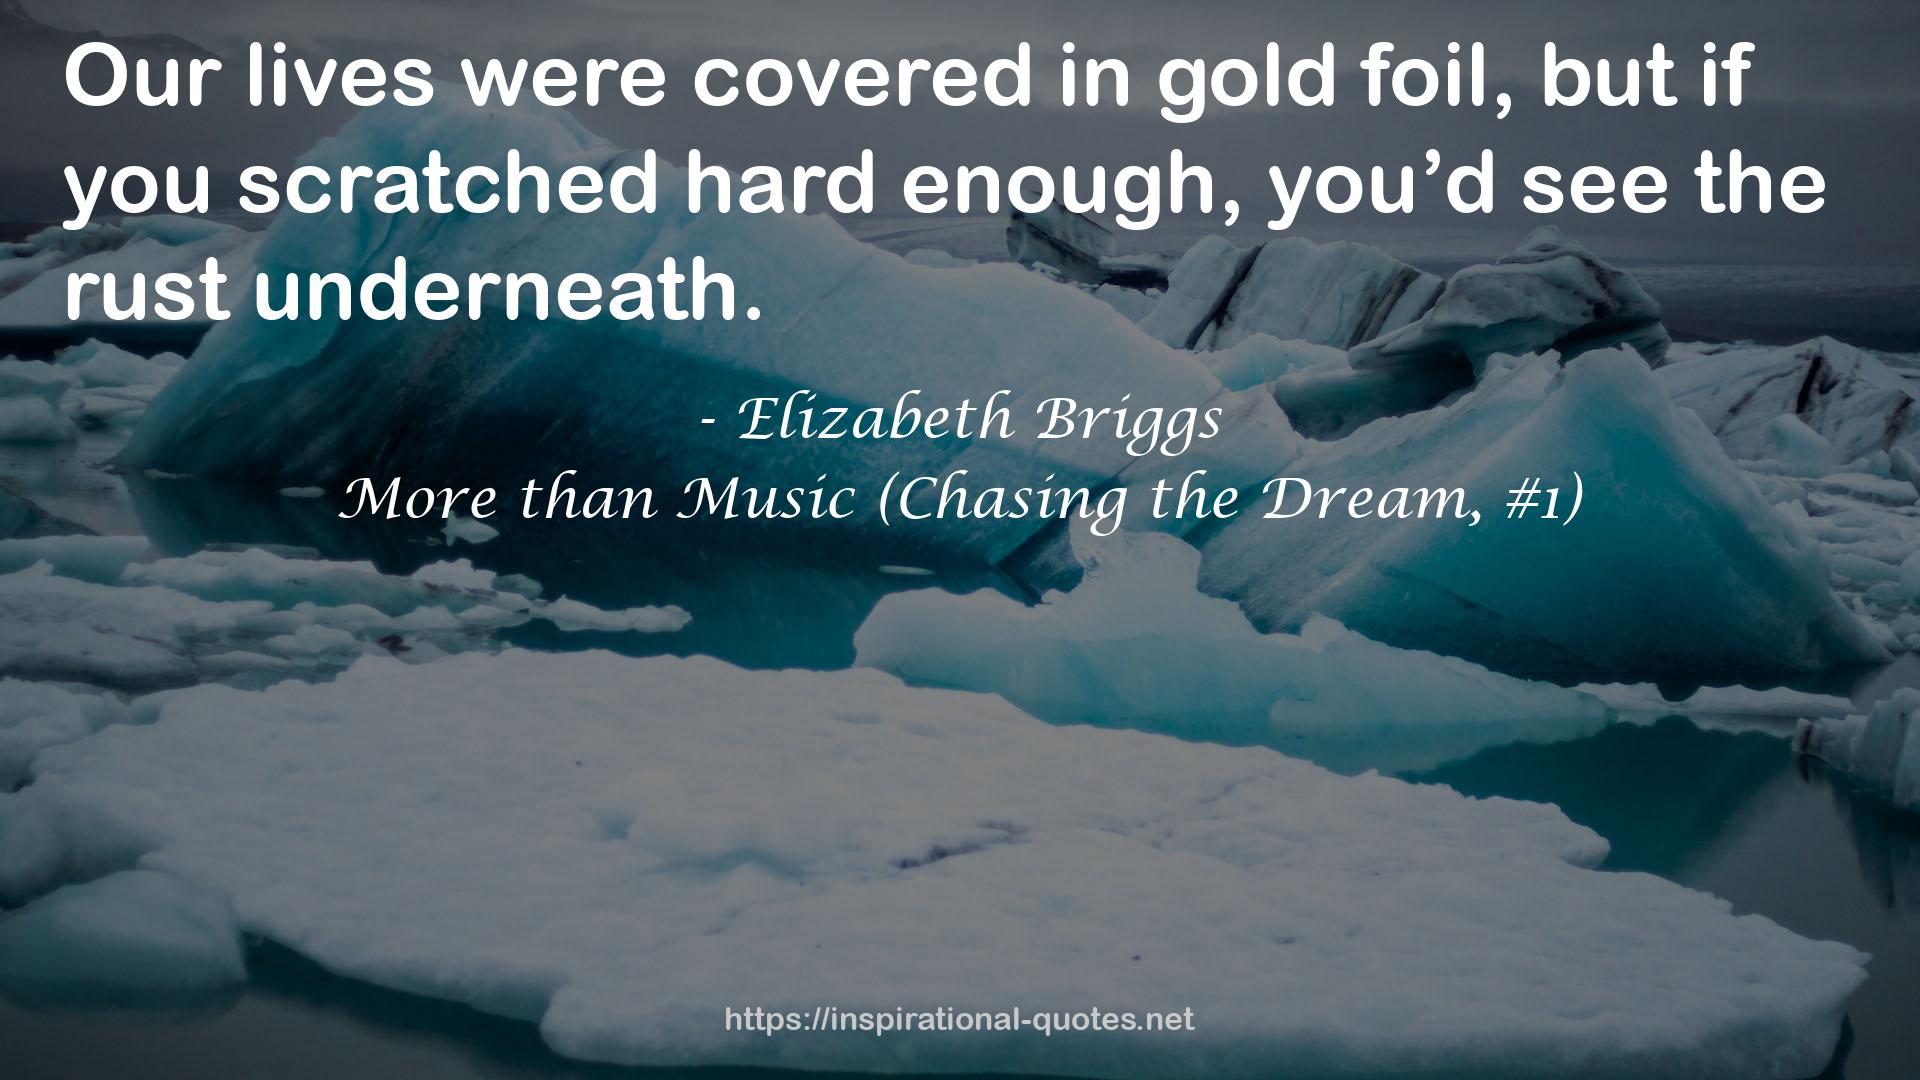 More than Music (Chasing the Dream, #1) QUOTES